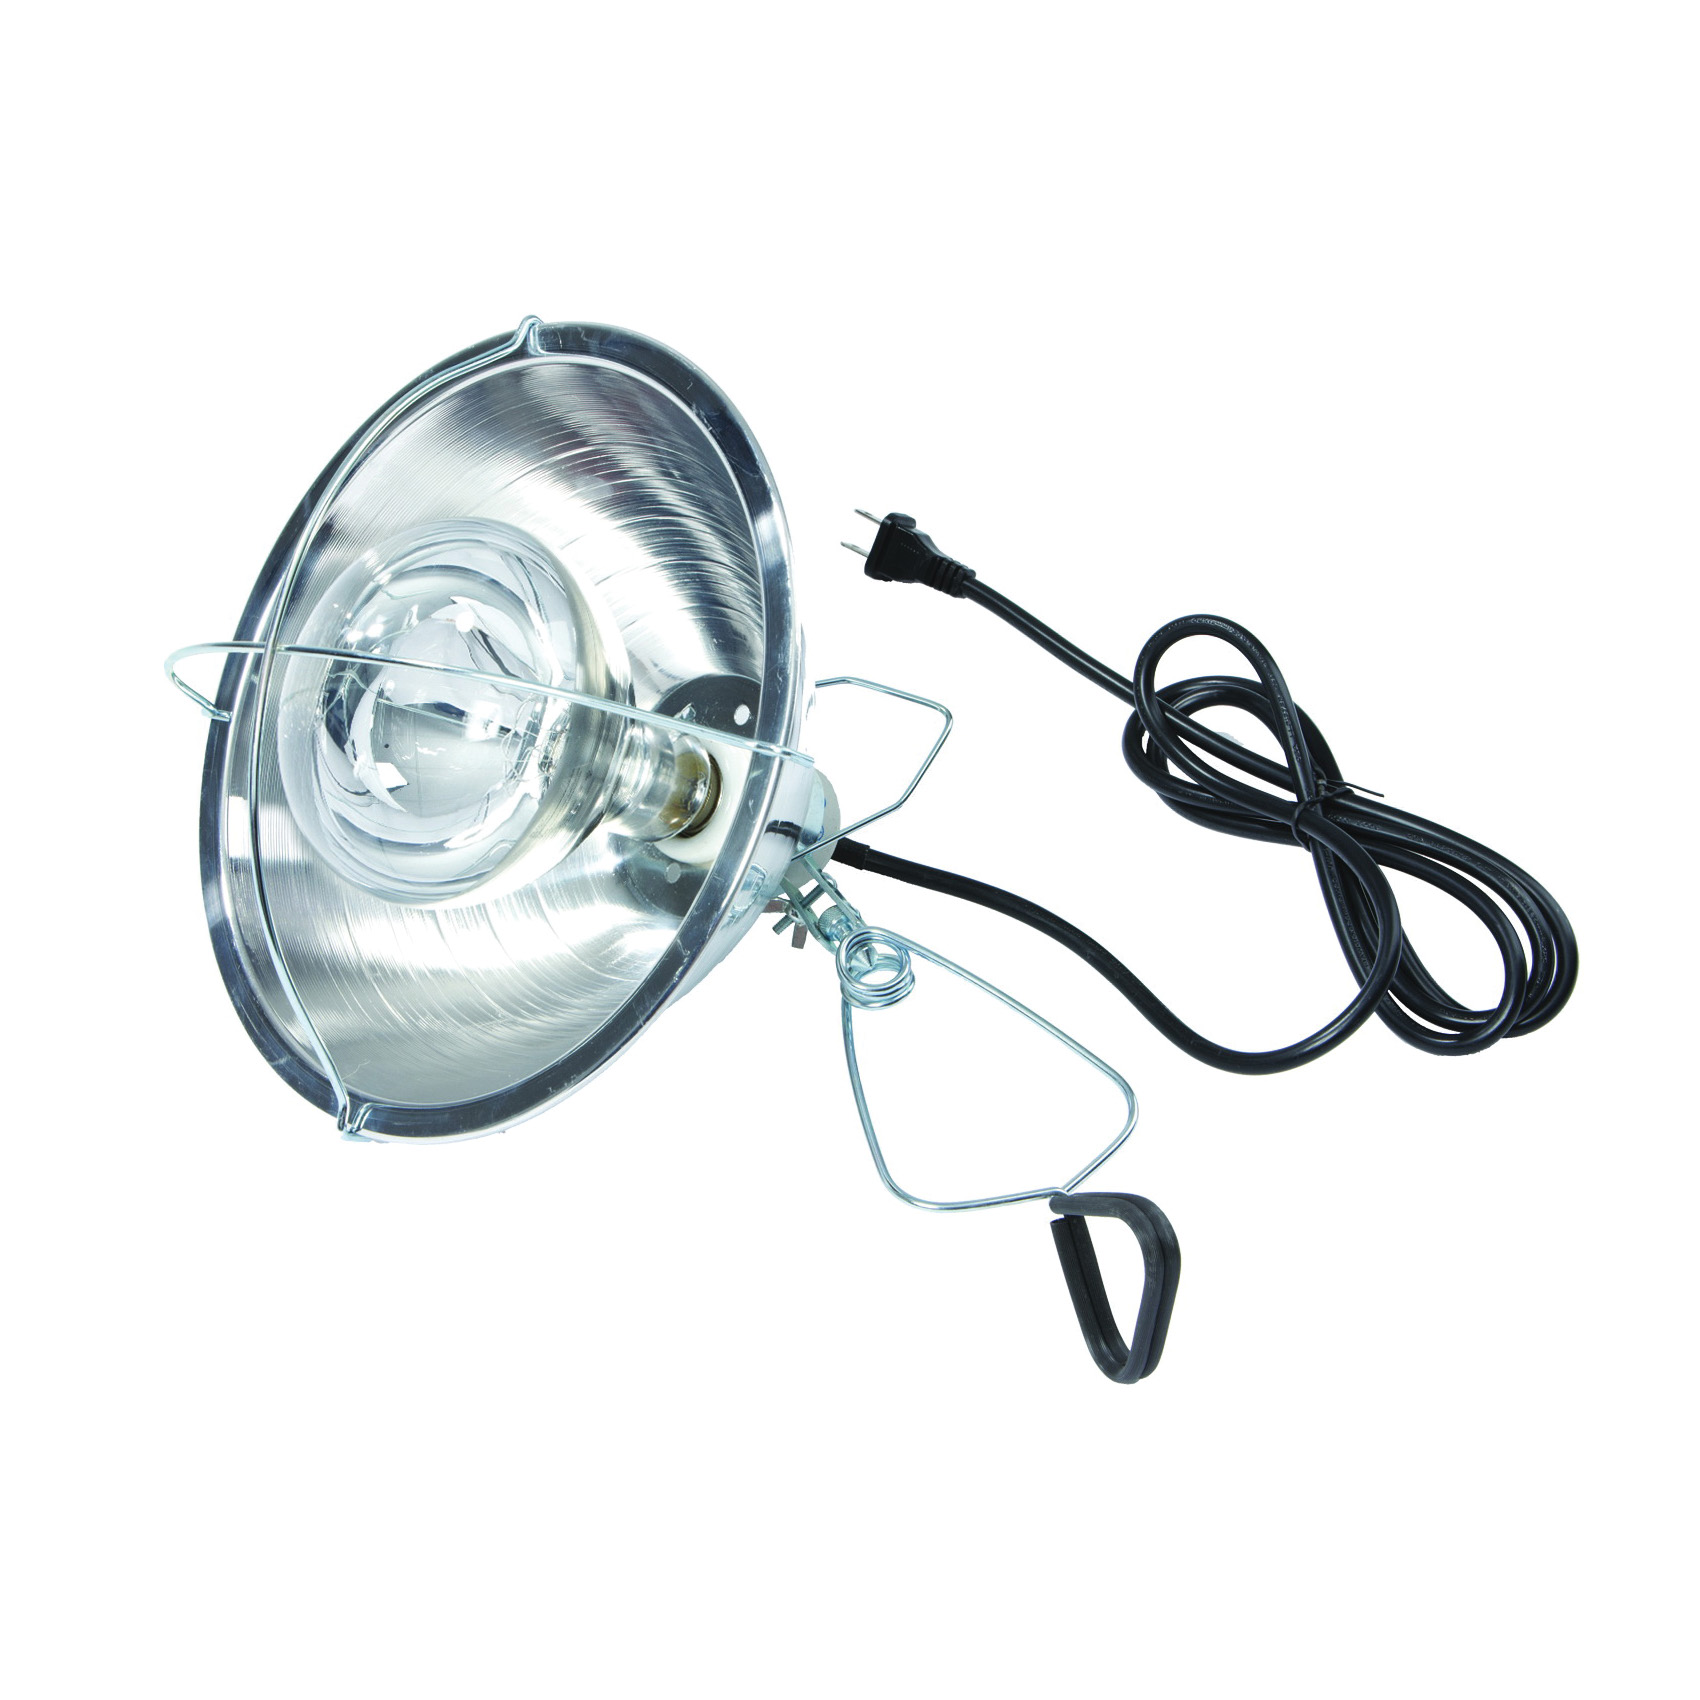 Little Giant 170017 Brooder Reflector Lamp, 300 W - 3